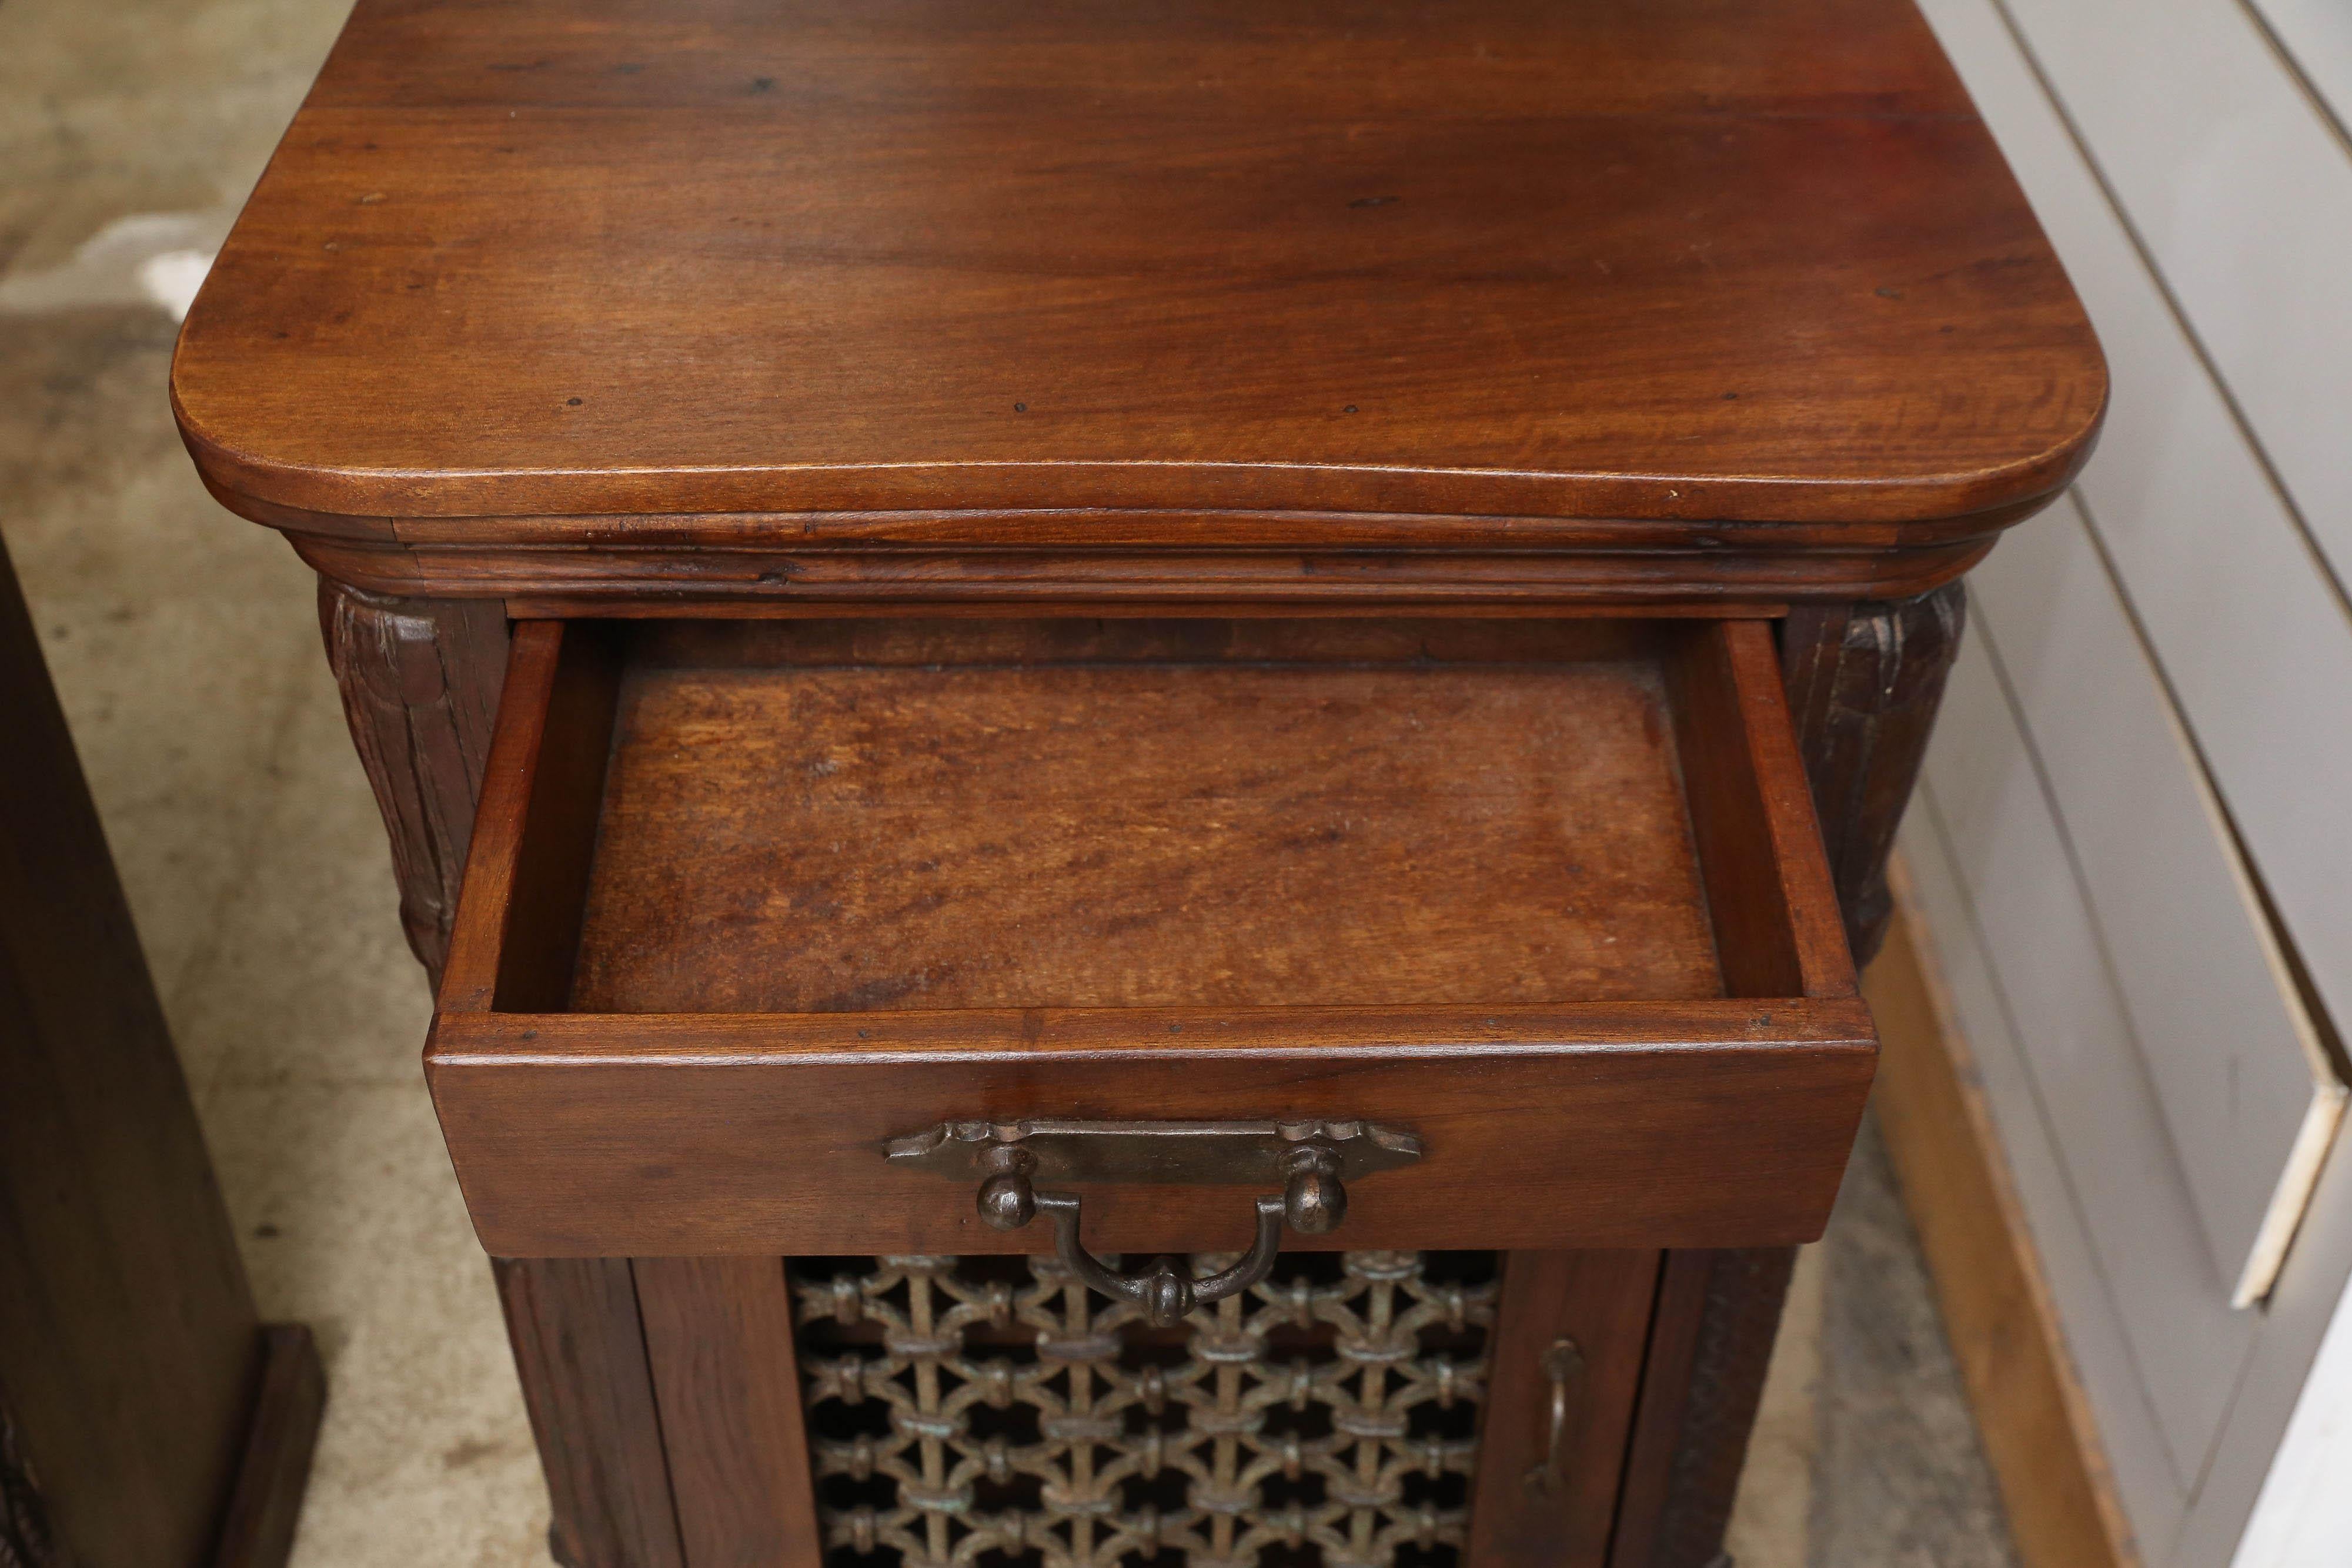 Hand-Crafted Pair of Highly Decorative Solid Teak Wood Nightstands from Plantation Homes